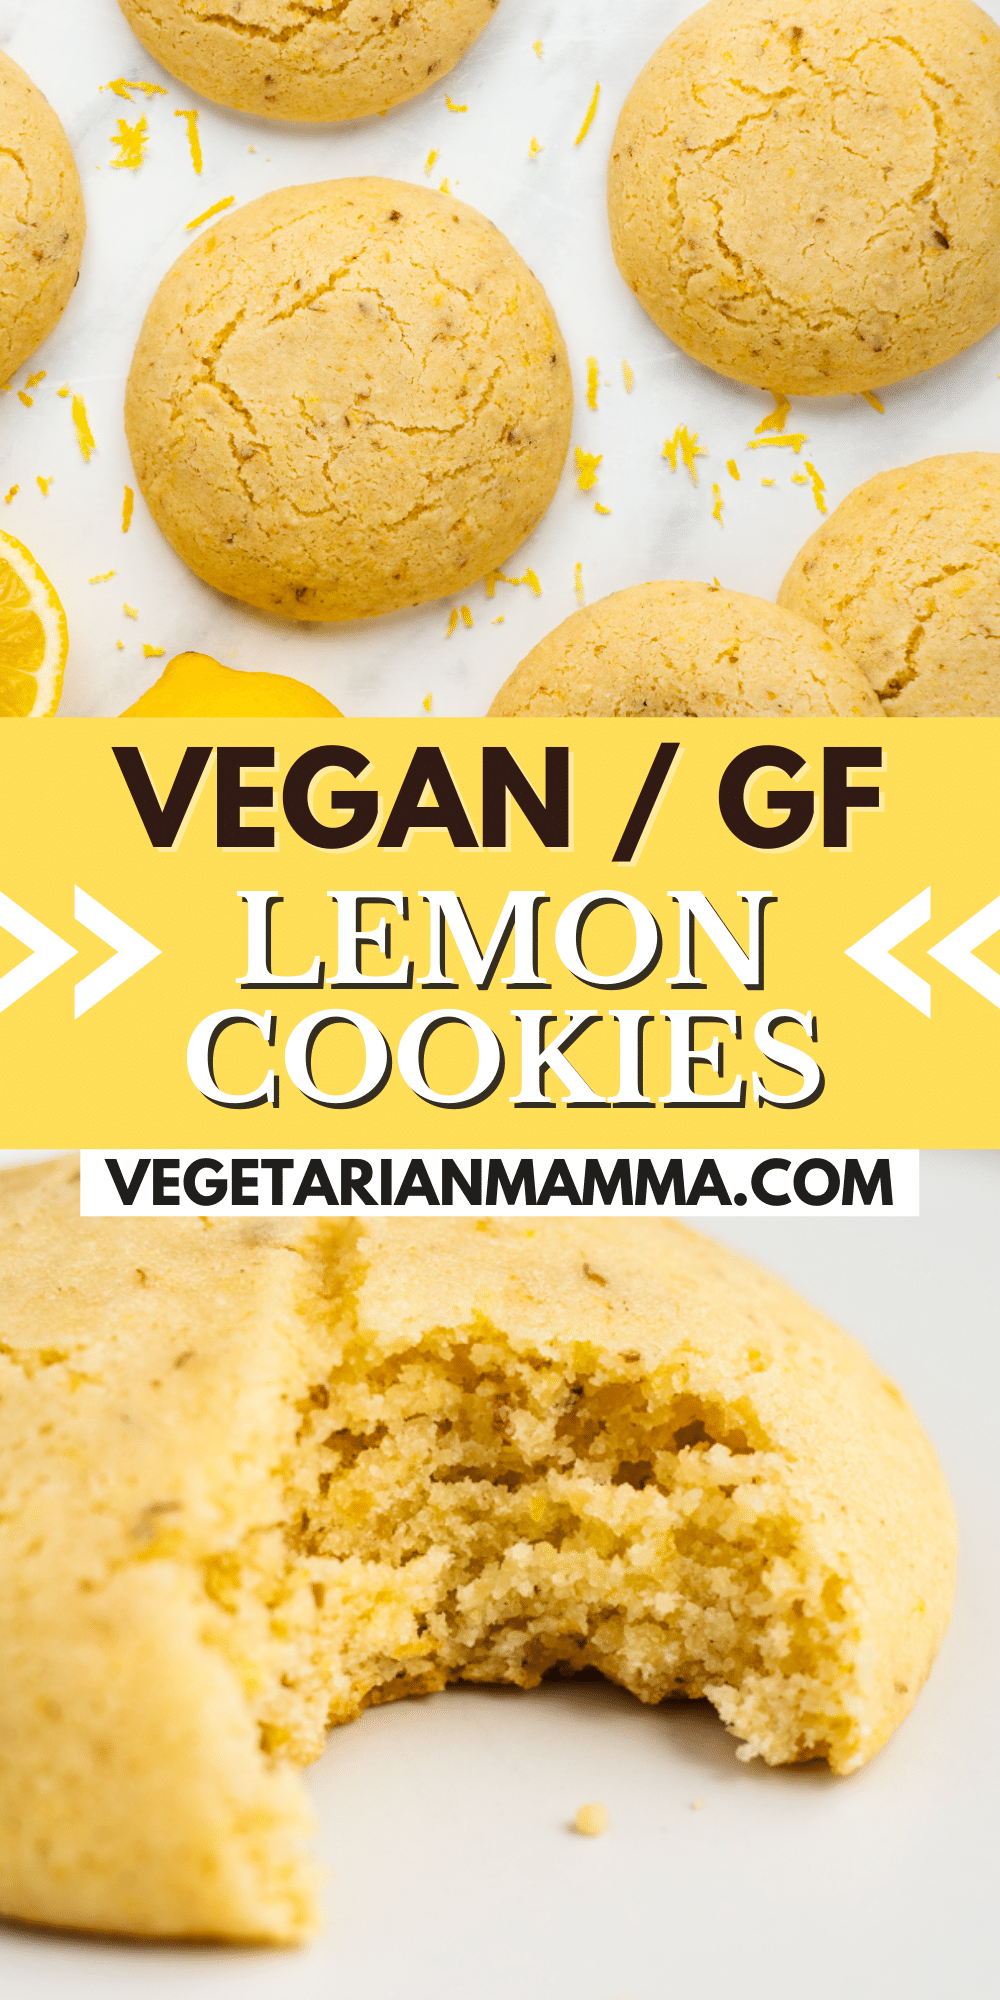 Vegan Lemon Cookies are soft, chewy and are packed with tangy lemon flavor. These Vegan Lemon Cookies come together with less than 10 ingredients. #vegan #cookies #lemon #lemoncookies #vegancookies #veganlemoncookies